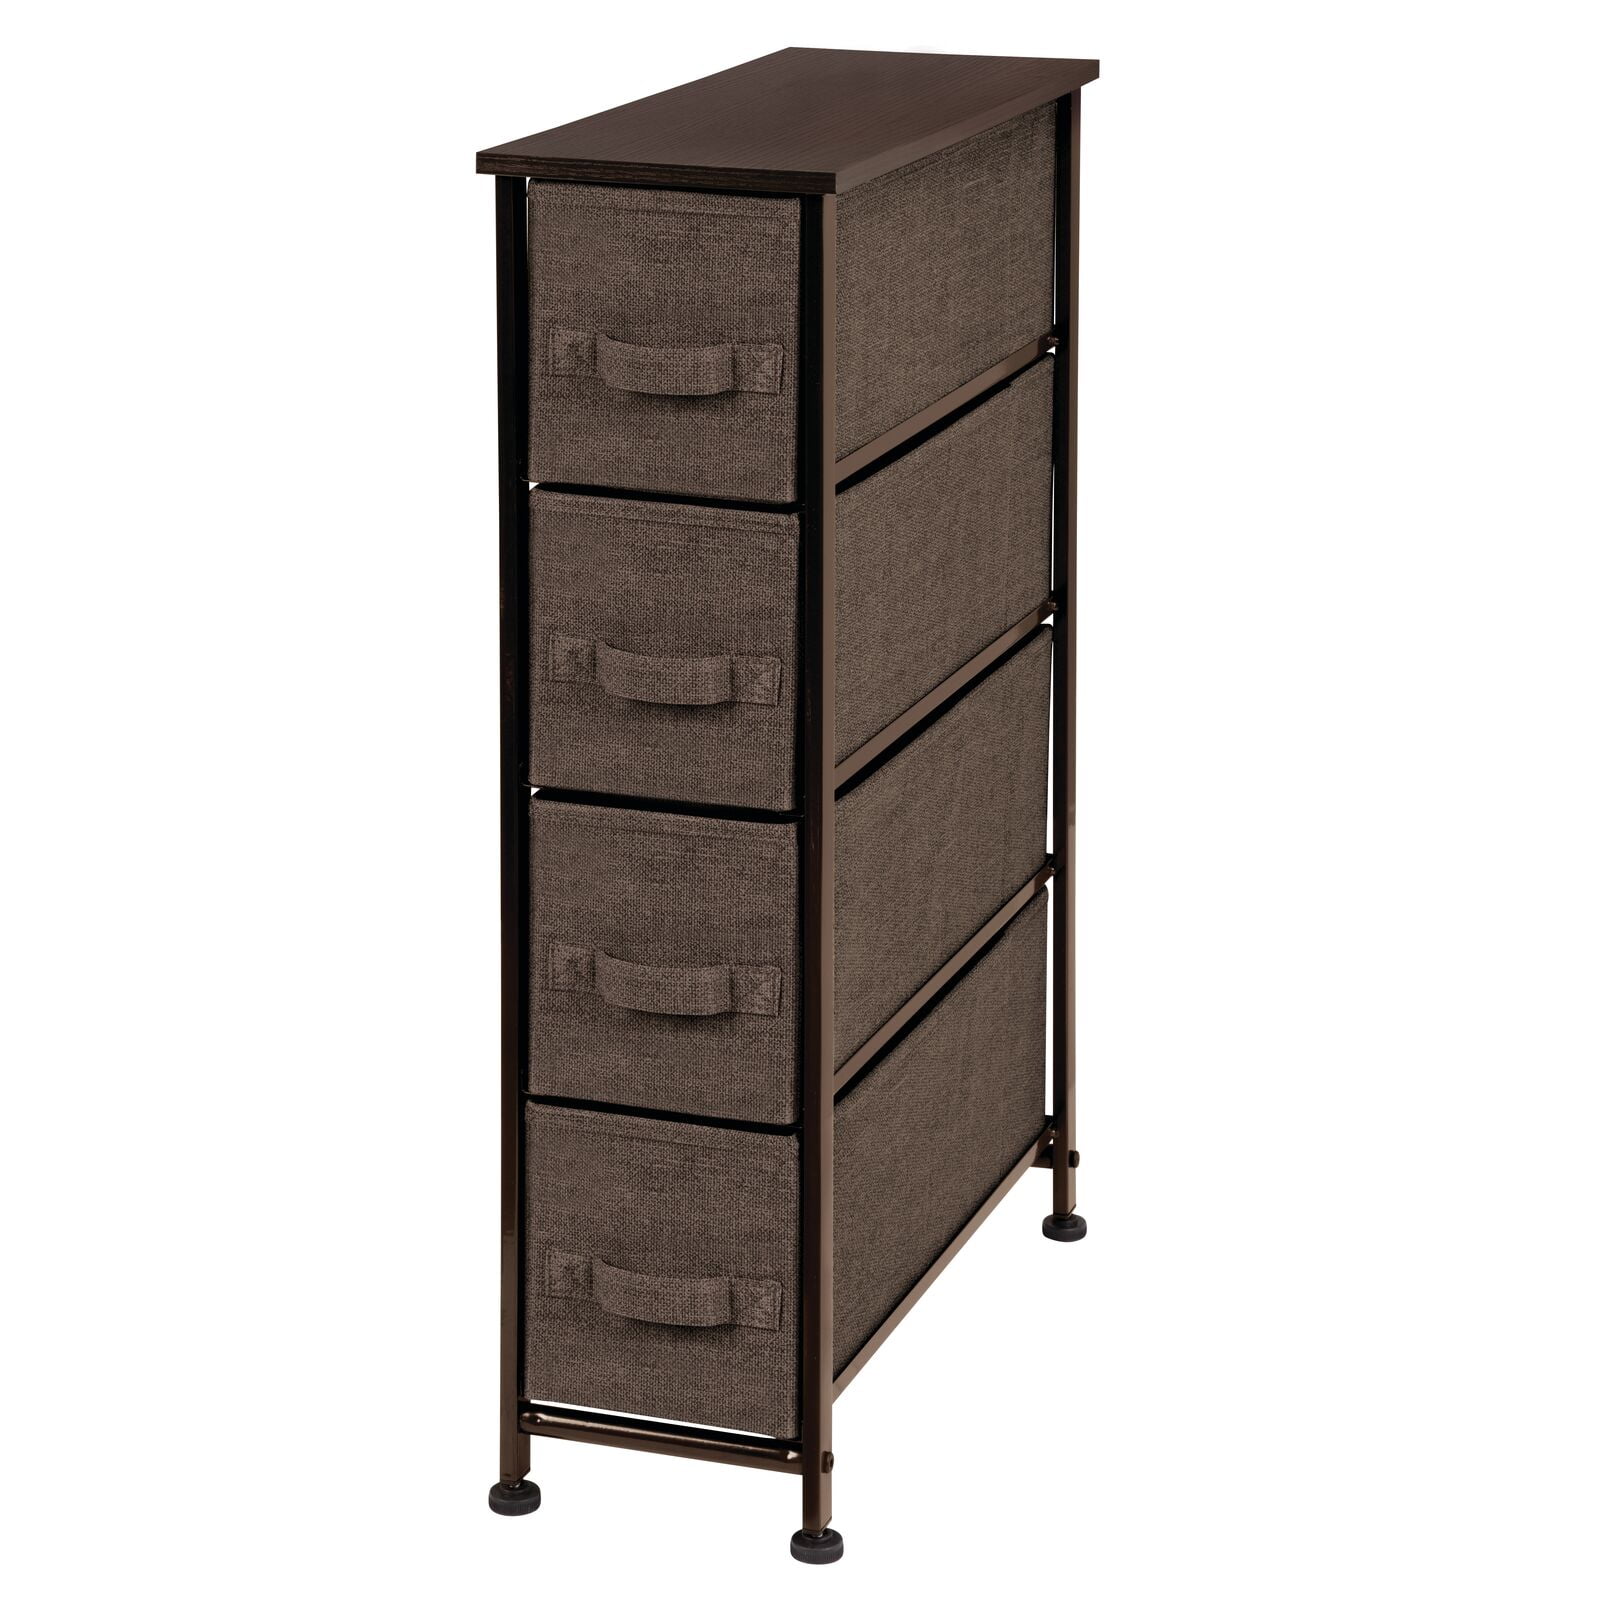 mDesign Tall Dresser Storage Tower Stand with 4 Removable Fabric Drawers -  Steel Frame, Wood Top Organizer for Bedroom, Entryway, Closet - Lido